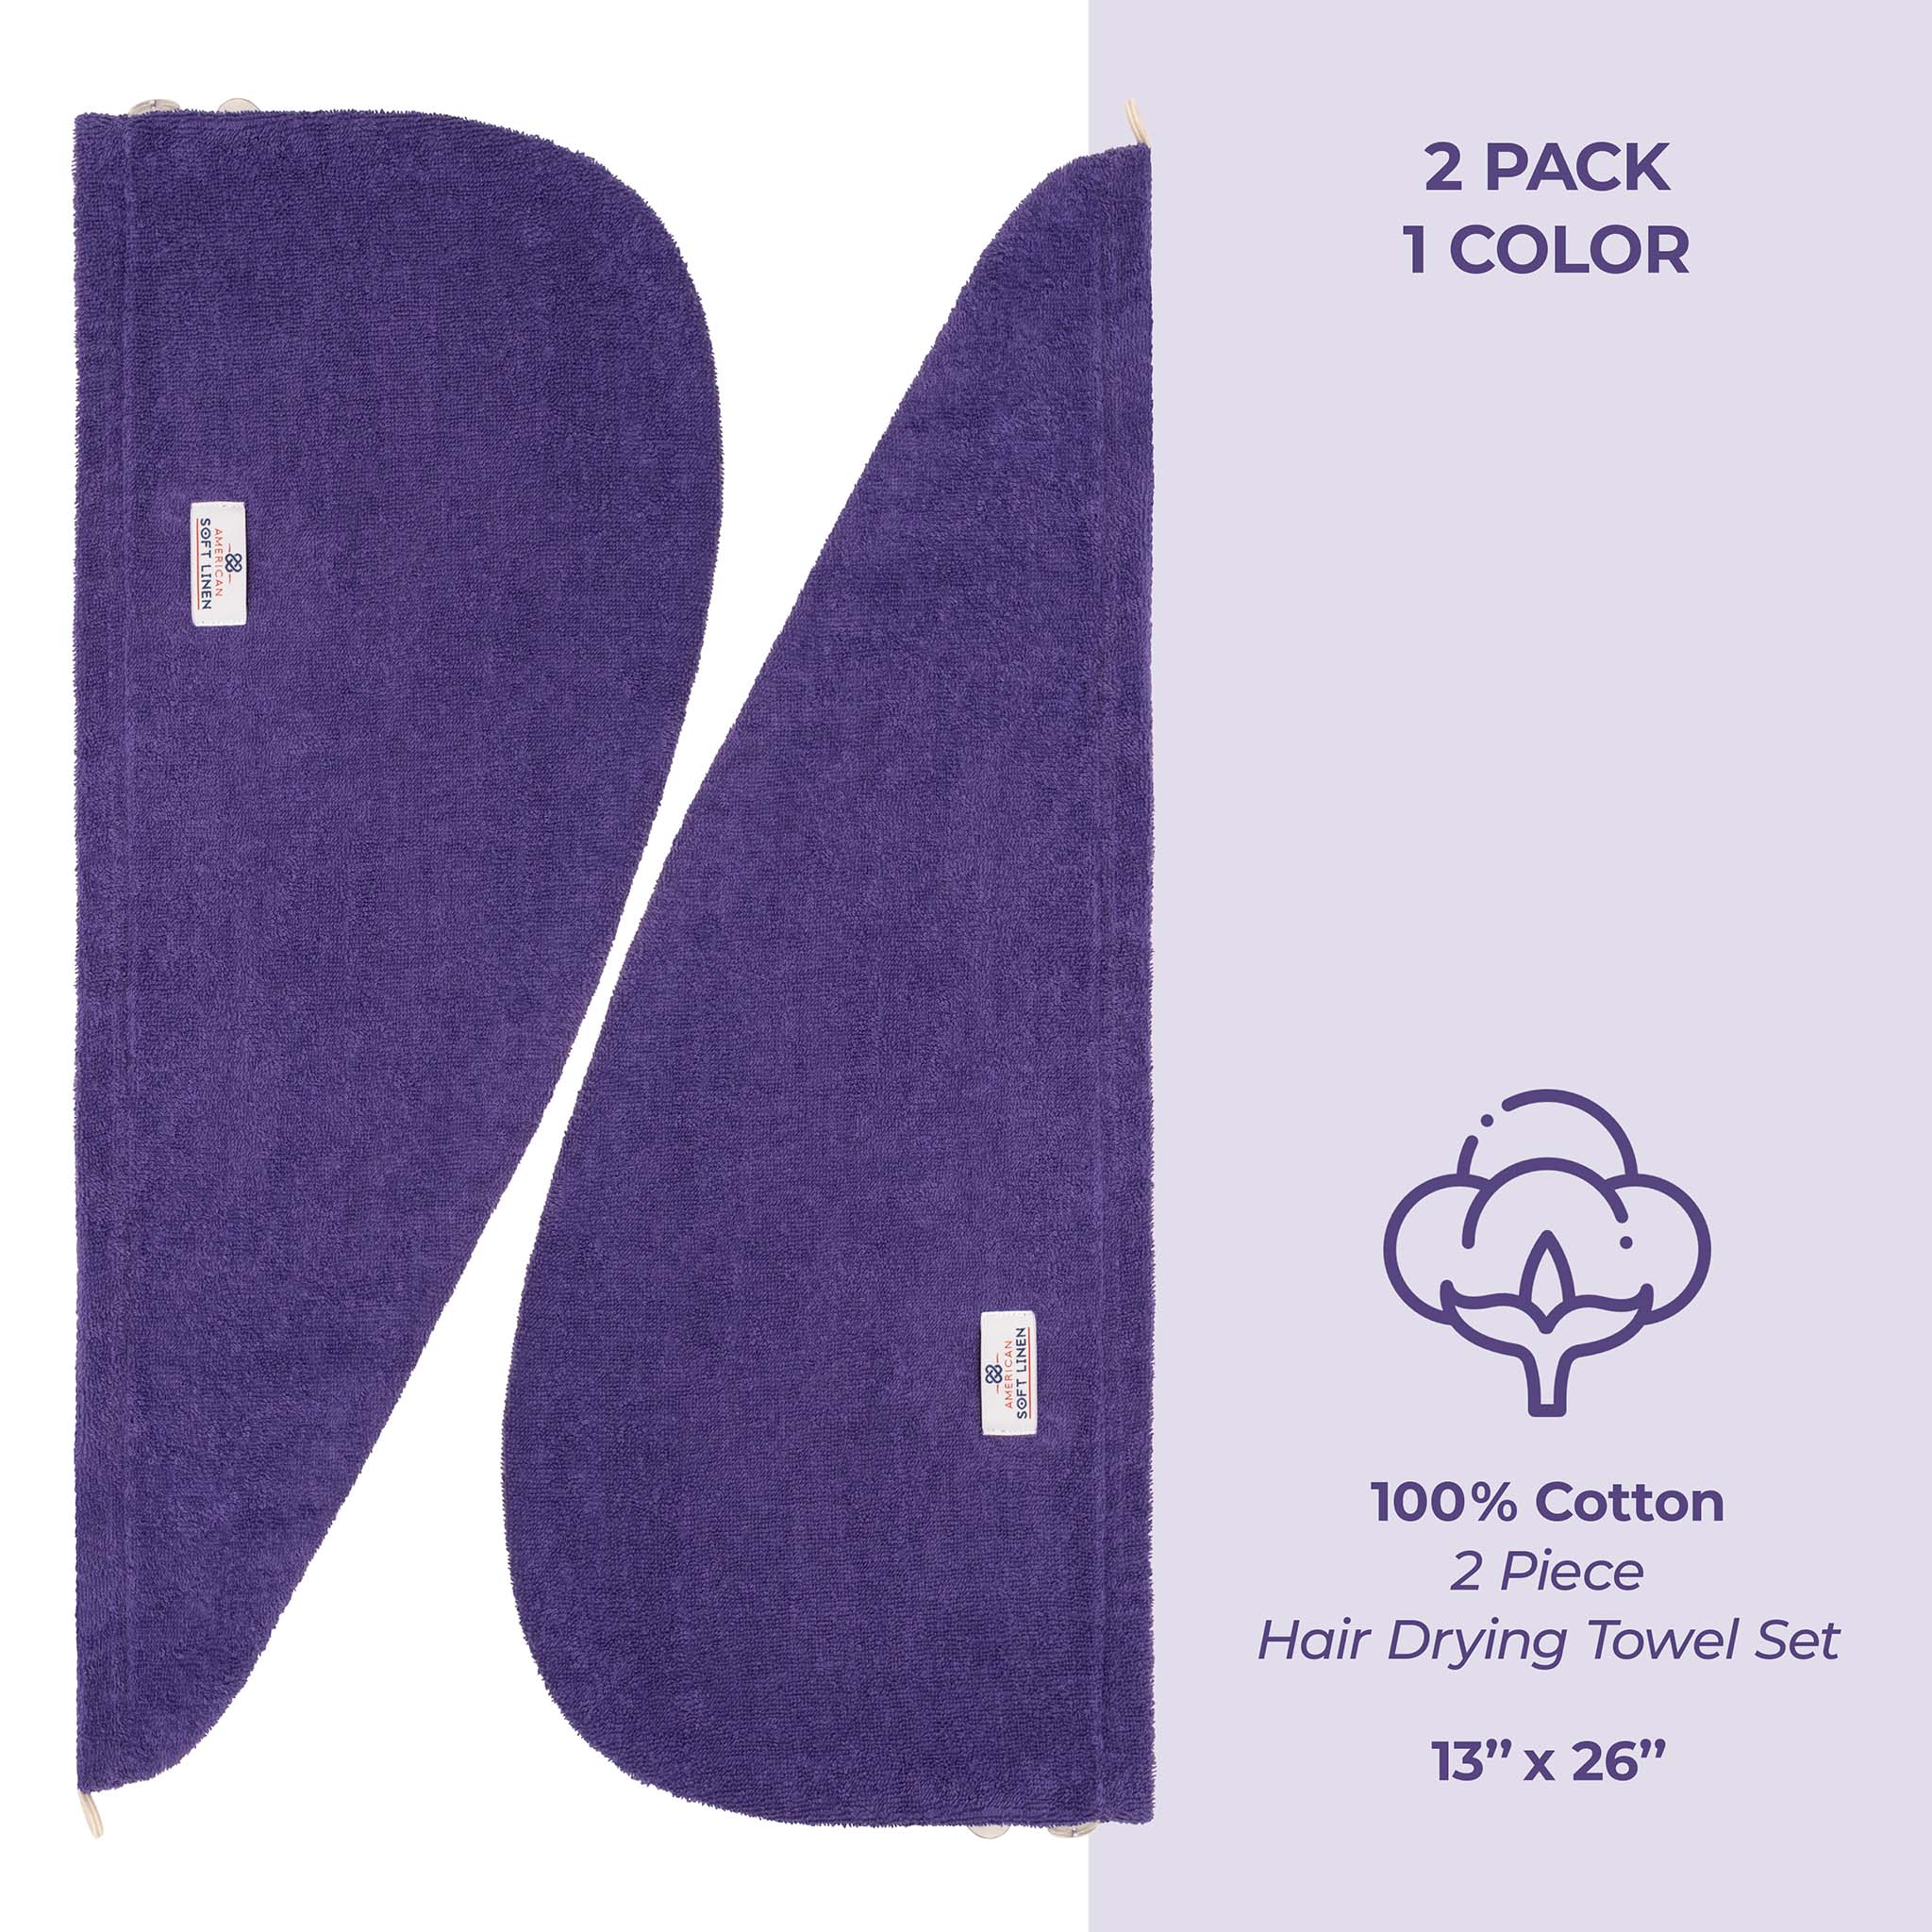 American Soft Linen 100% Cotton Hair Drying Towels for Women 2 pack 75 set case pack purple-4